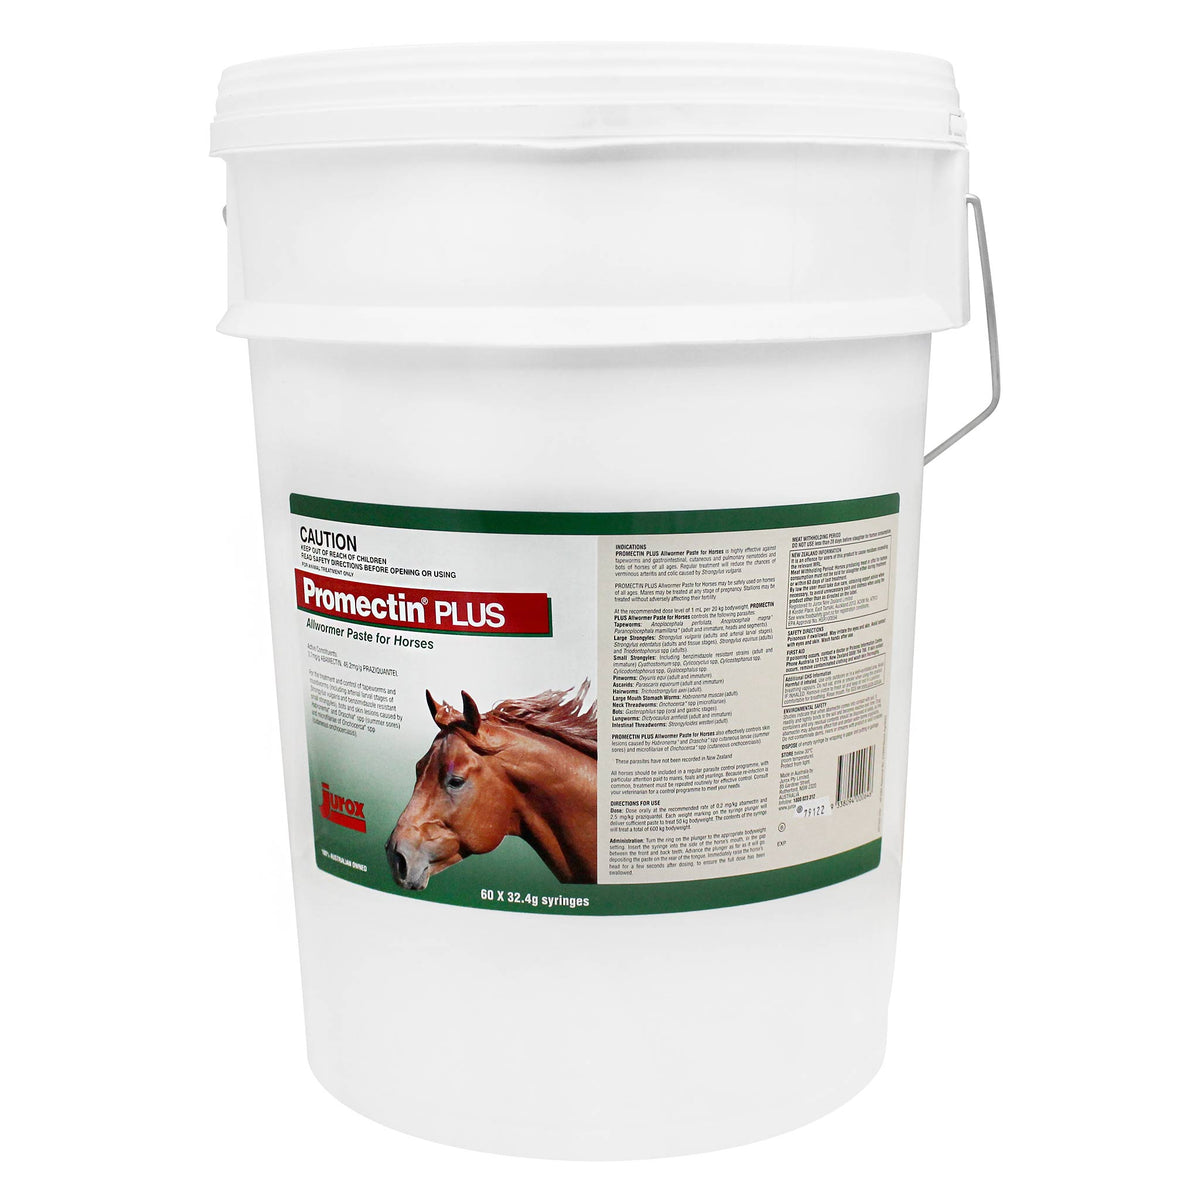 Promectin Plus Worming Paste for Horses - Stud Bucket 60 Tubes